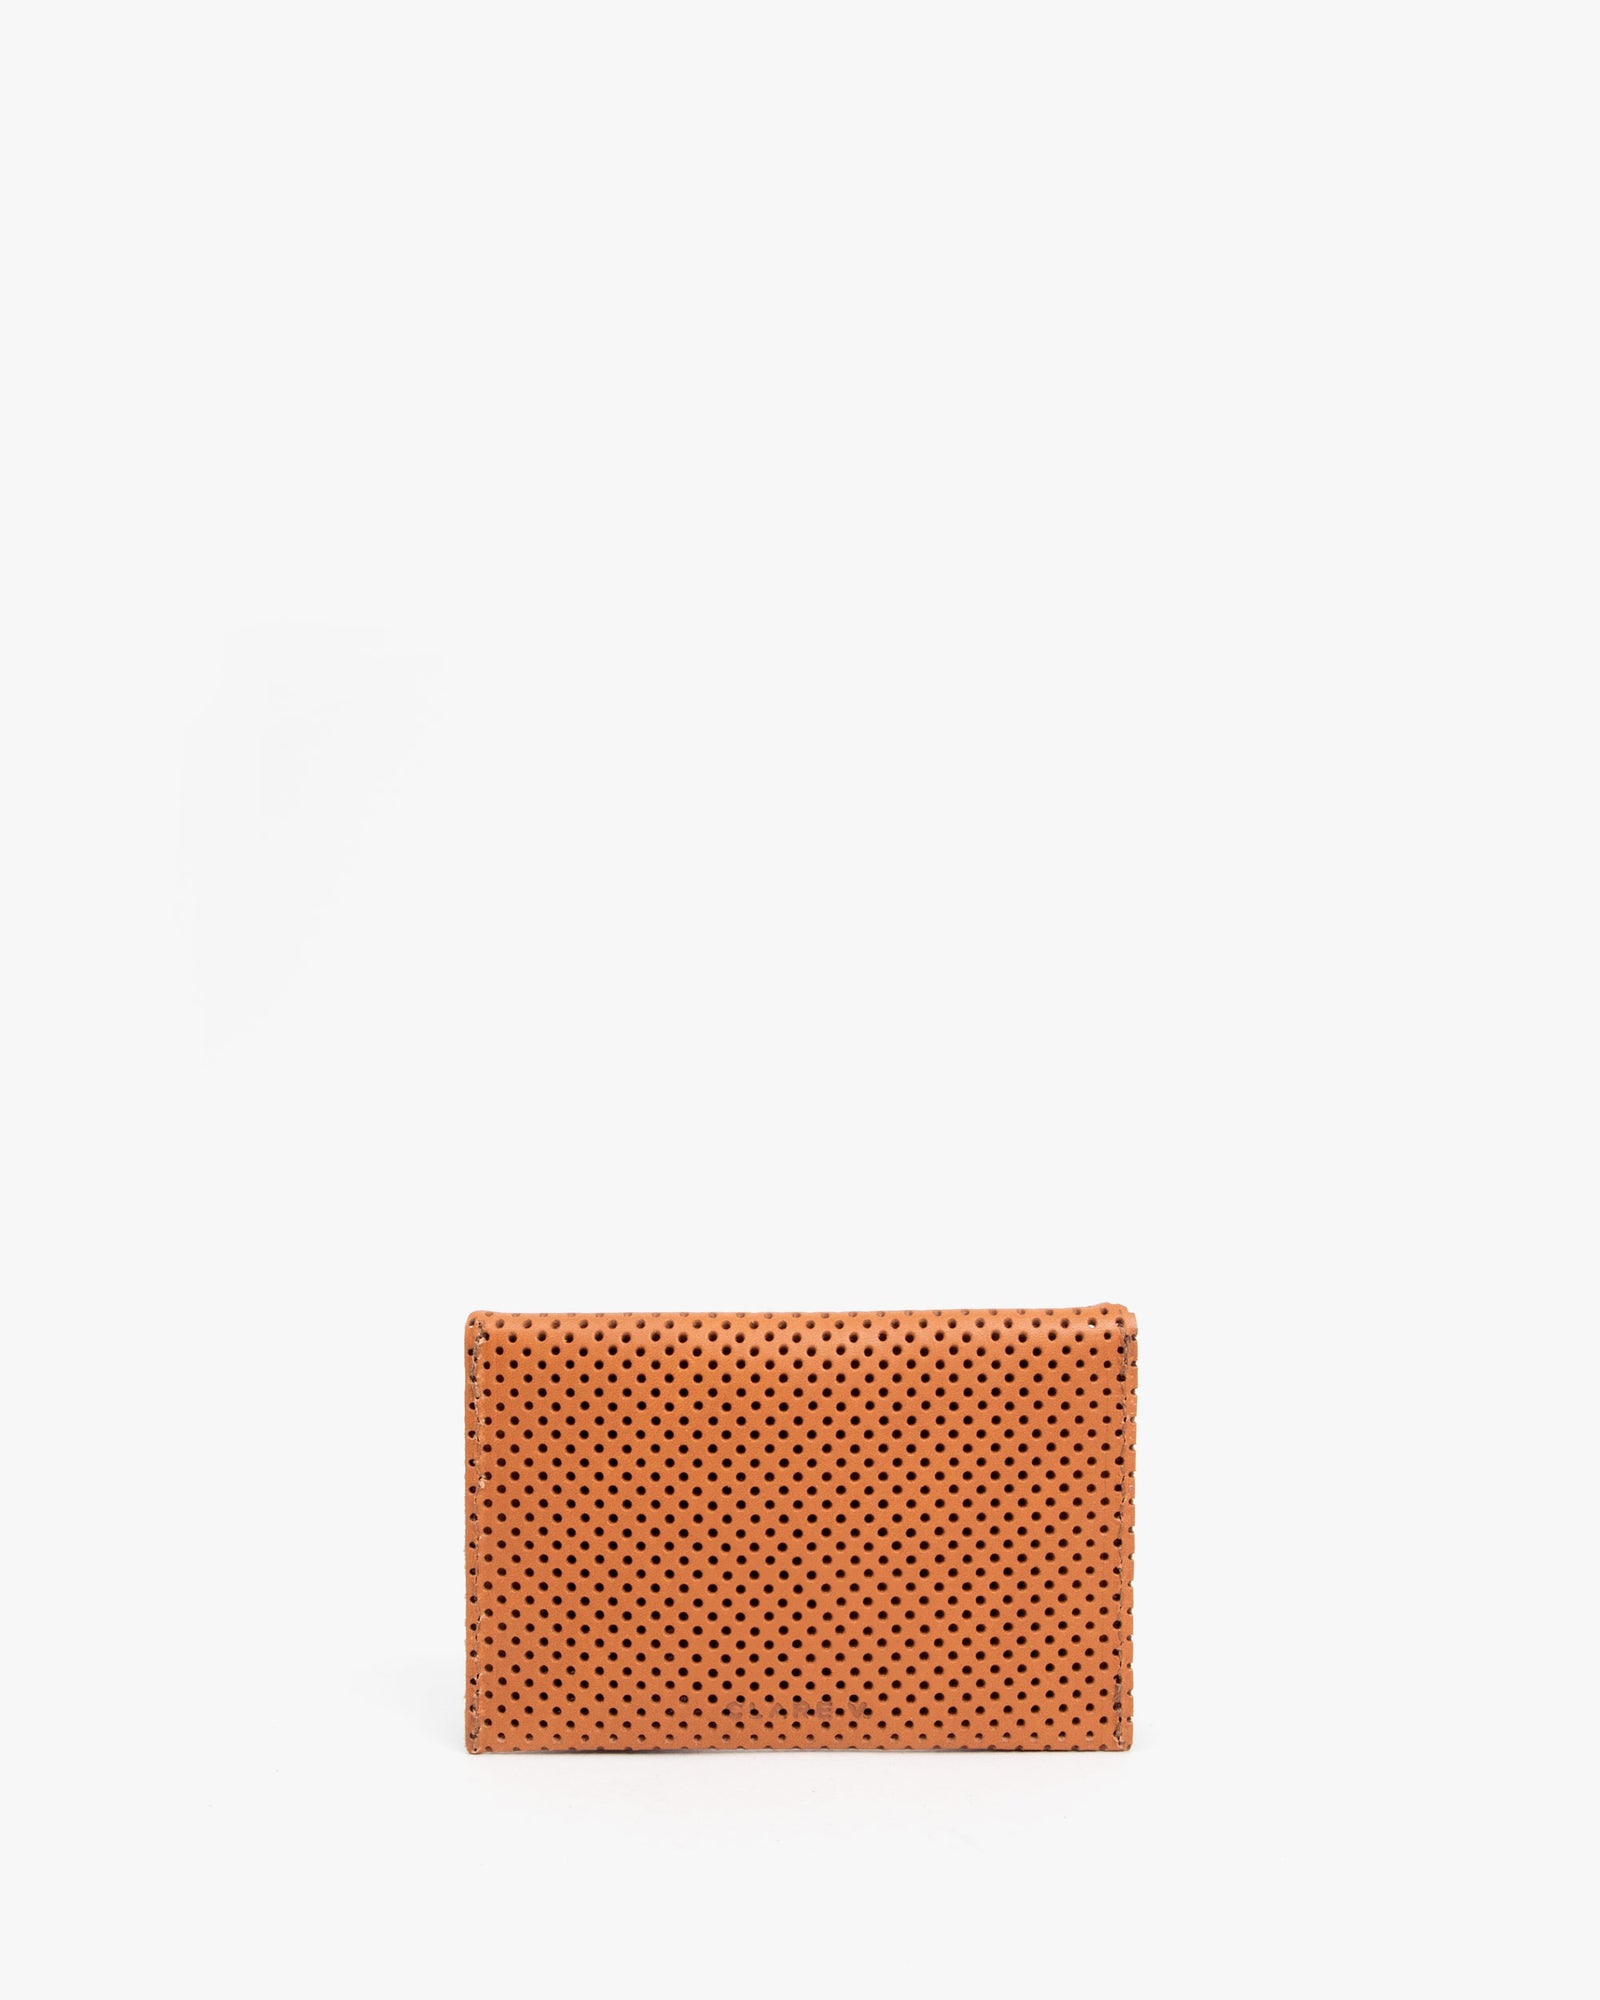 Cuoio Perf Card Envelope - Back